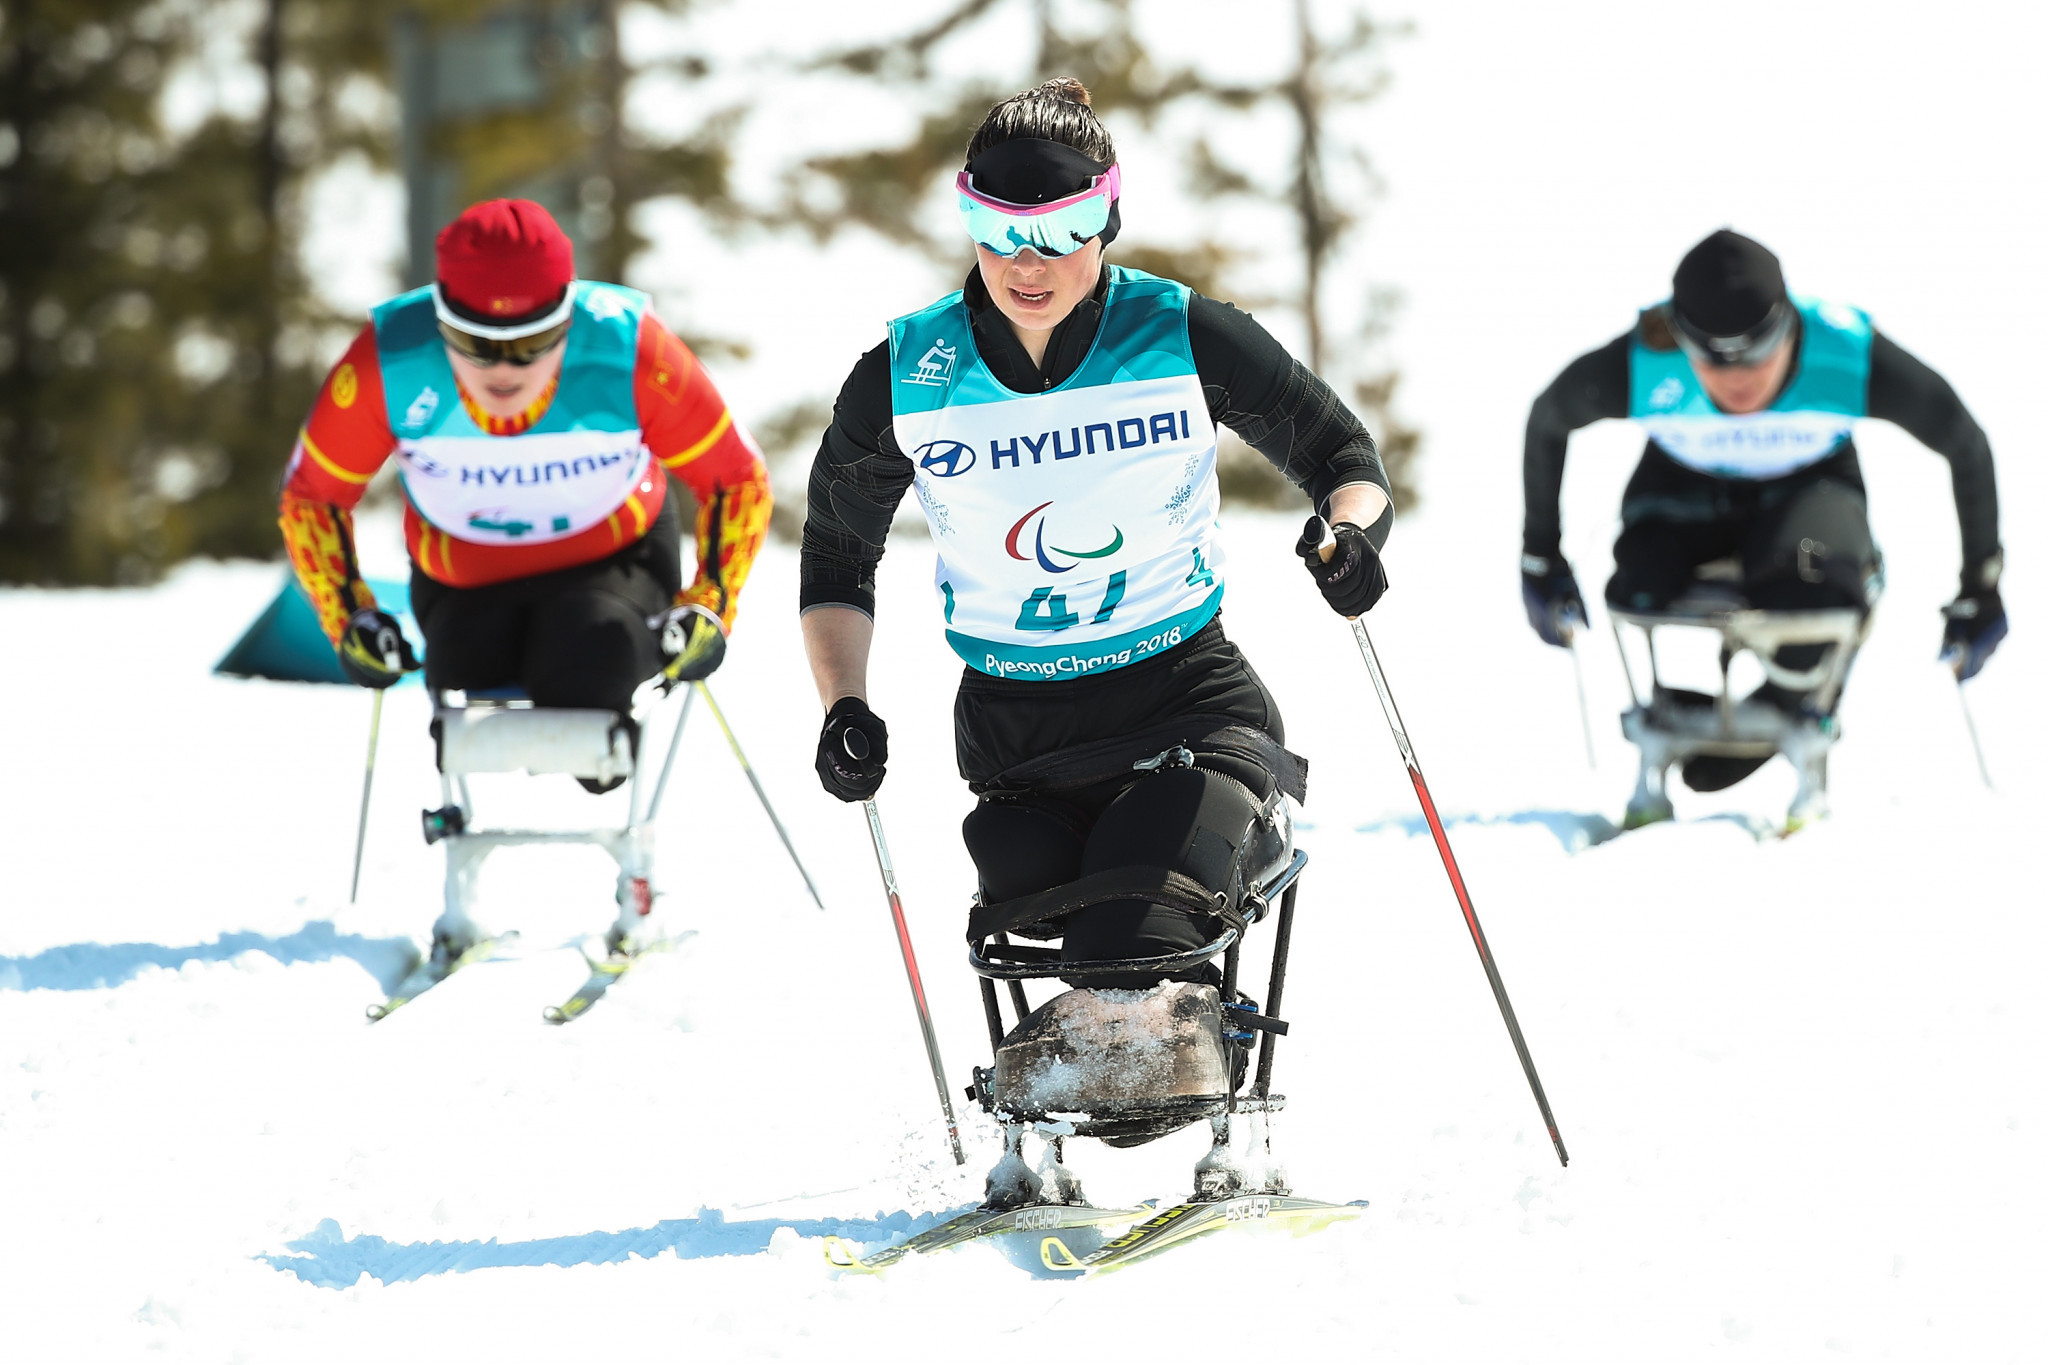 Russian athletes were forced to compete as neutrals at the 2018 Winter Paralympic Games in Pyeongchang ©Getty Images